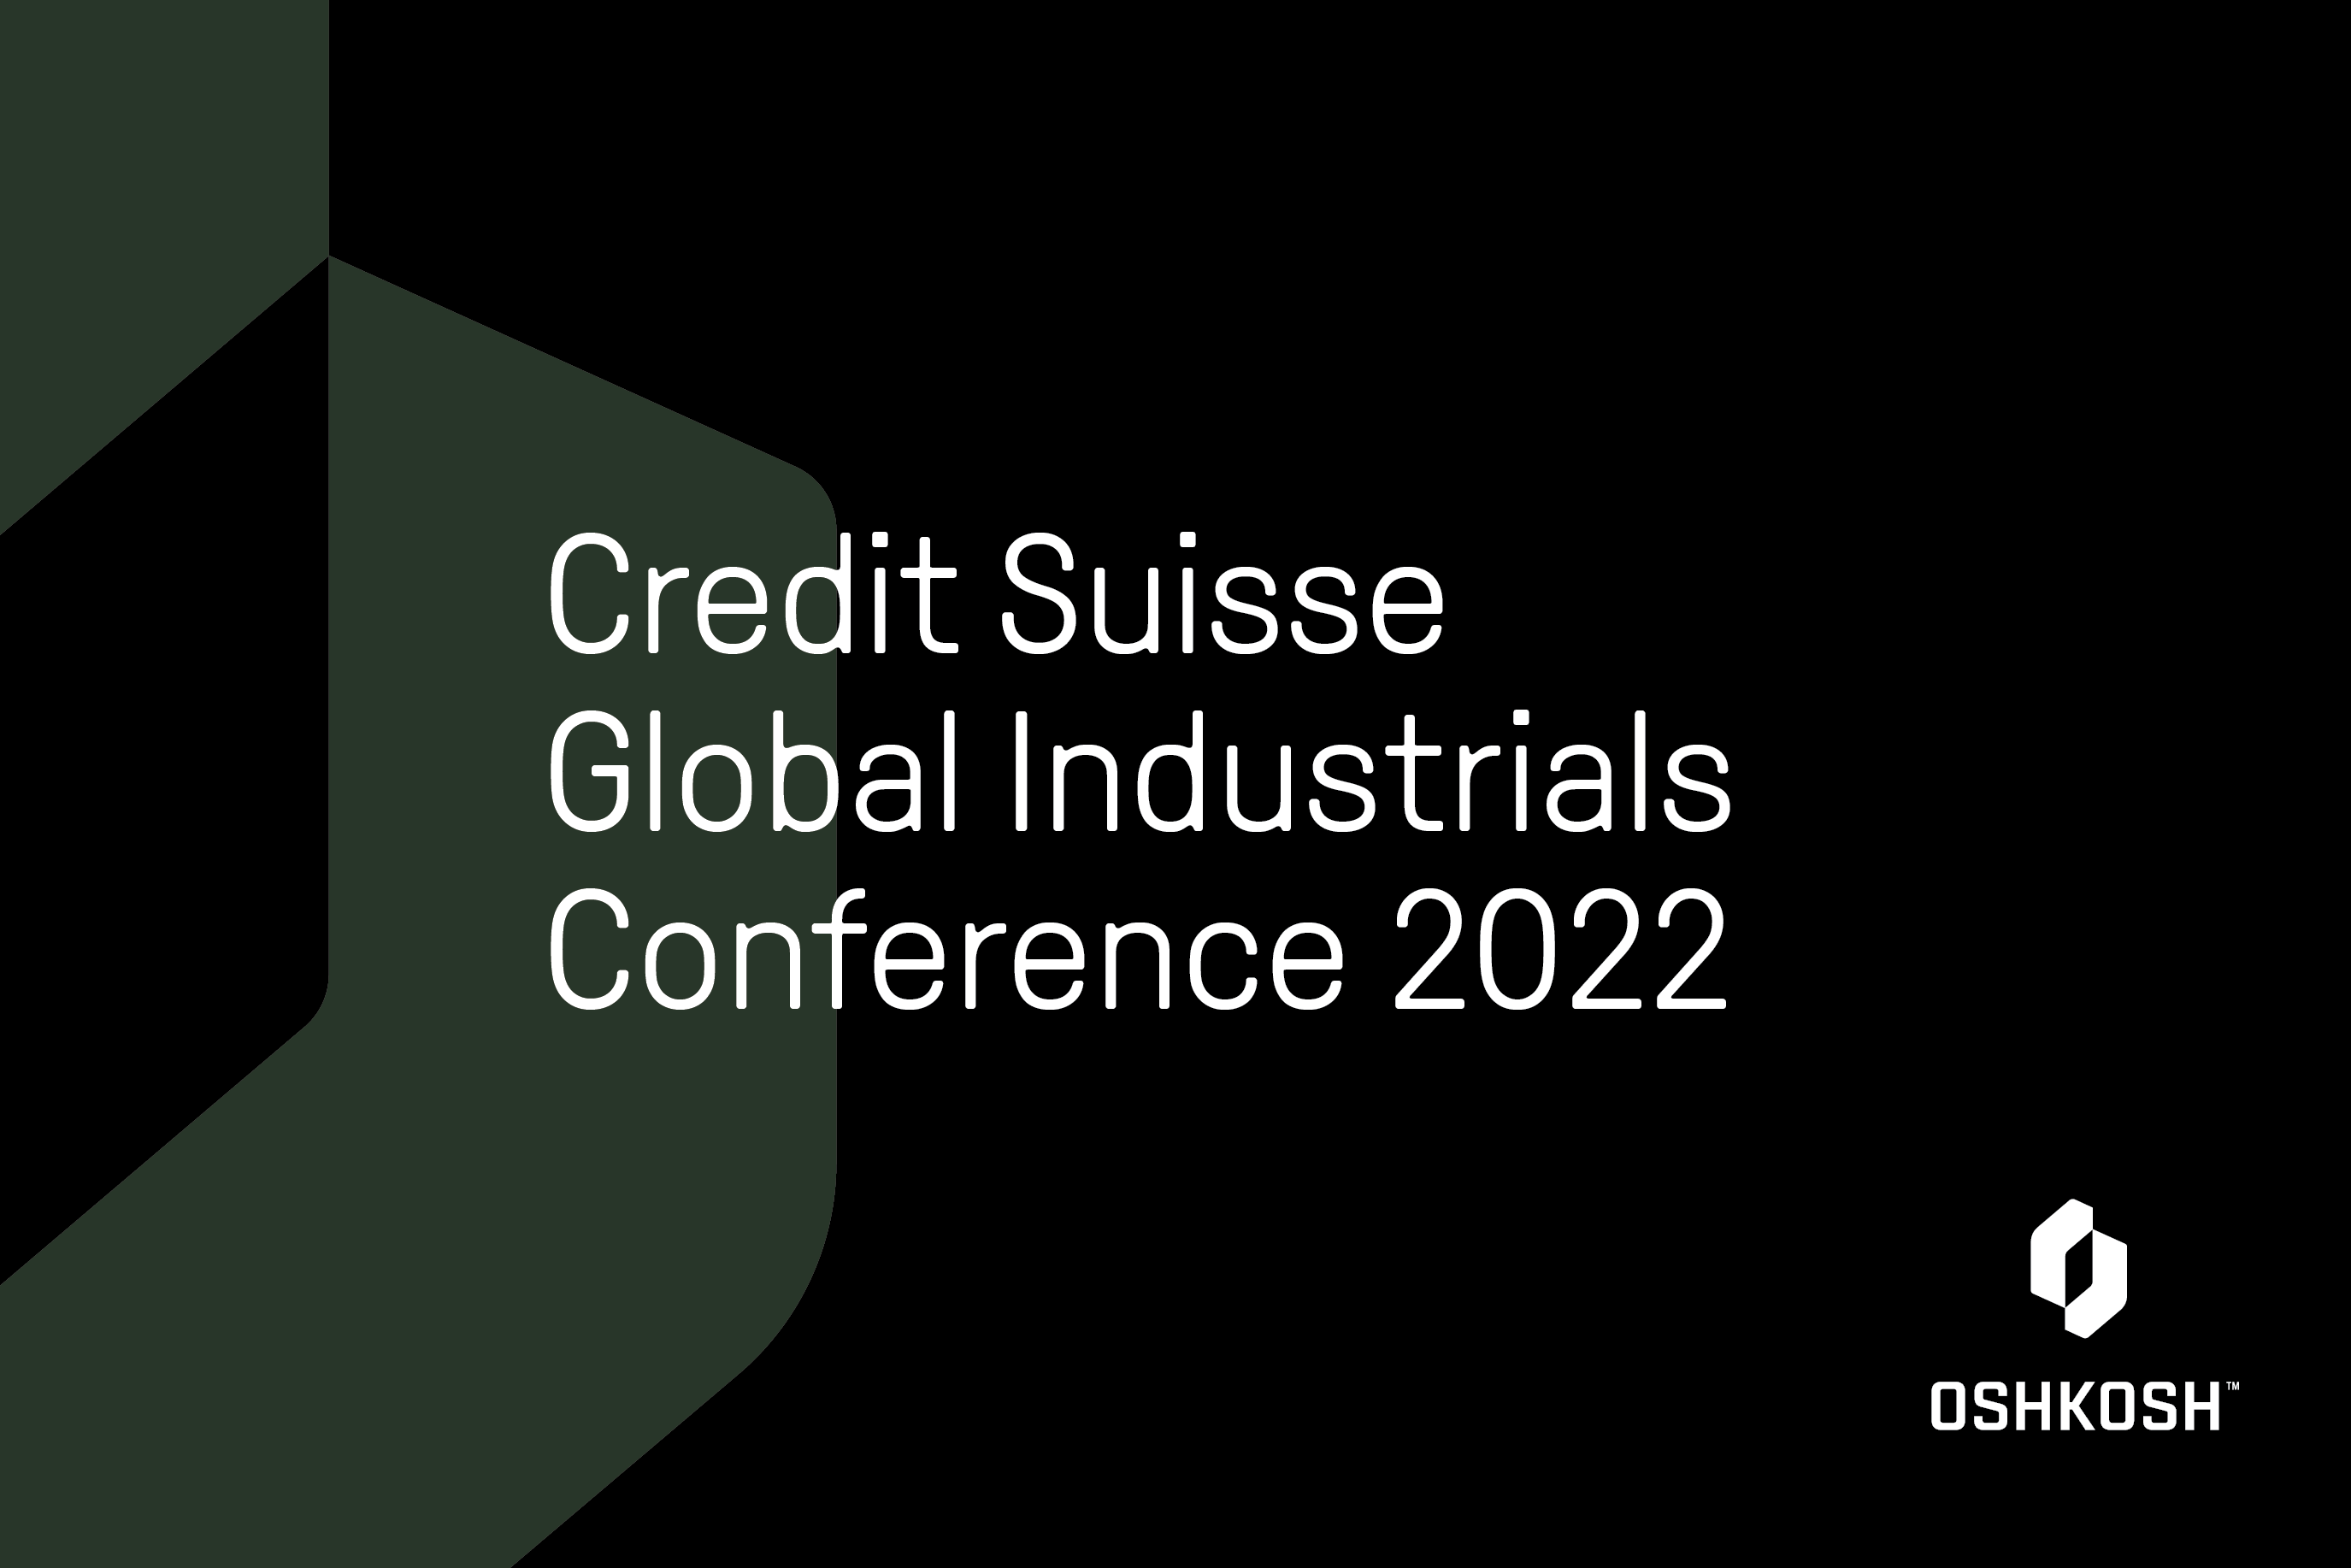 Green cropped O mark on black background with white Oshkosh Corporation logo and white text that reads Credit Suisse Global Industrials Conference 2022